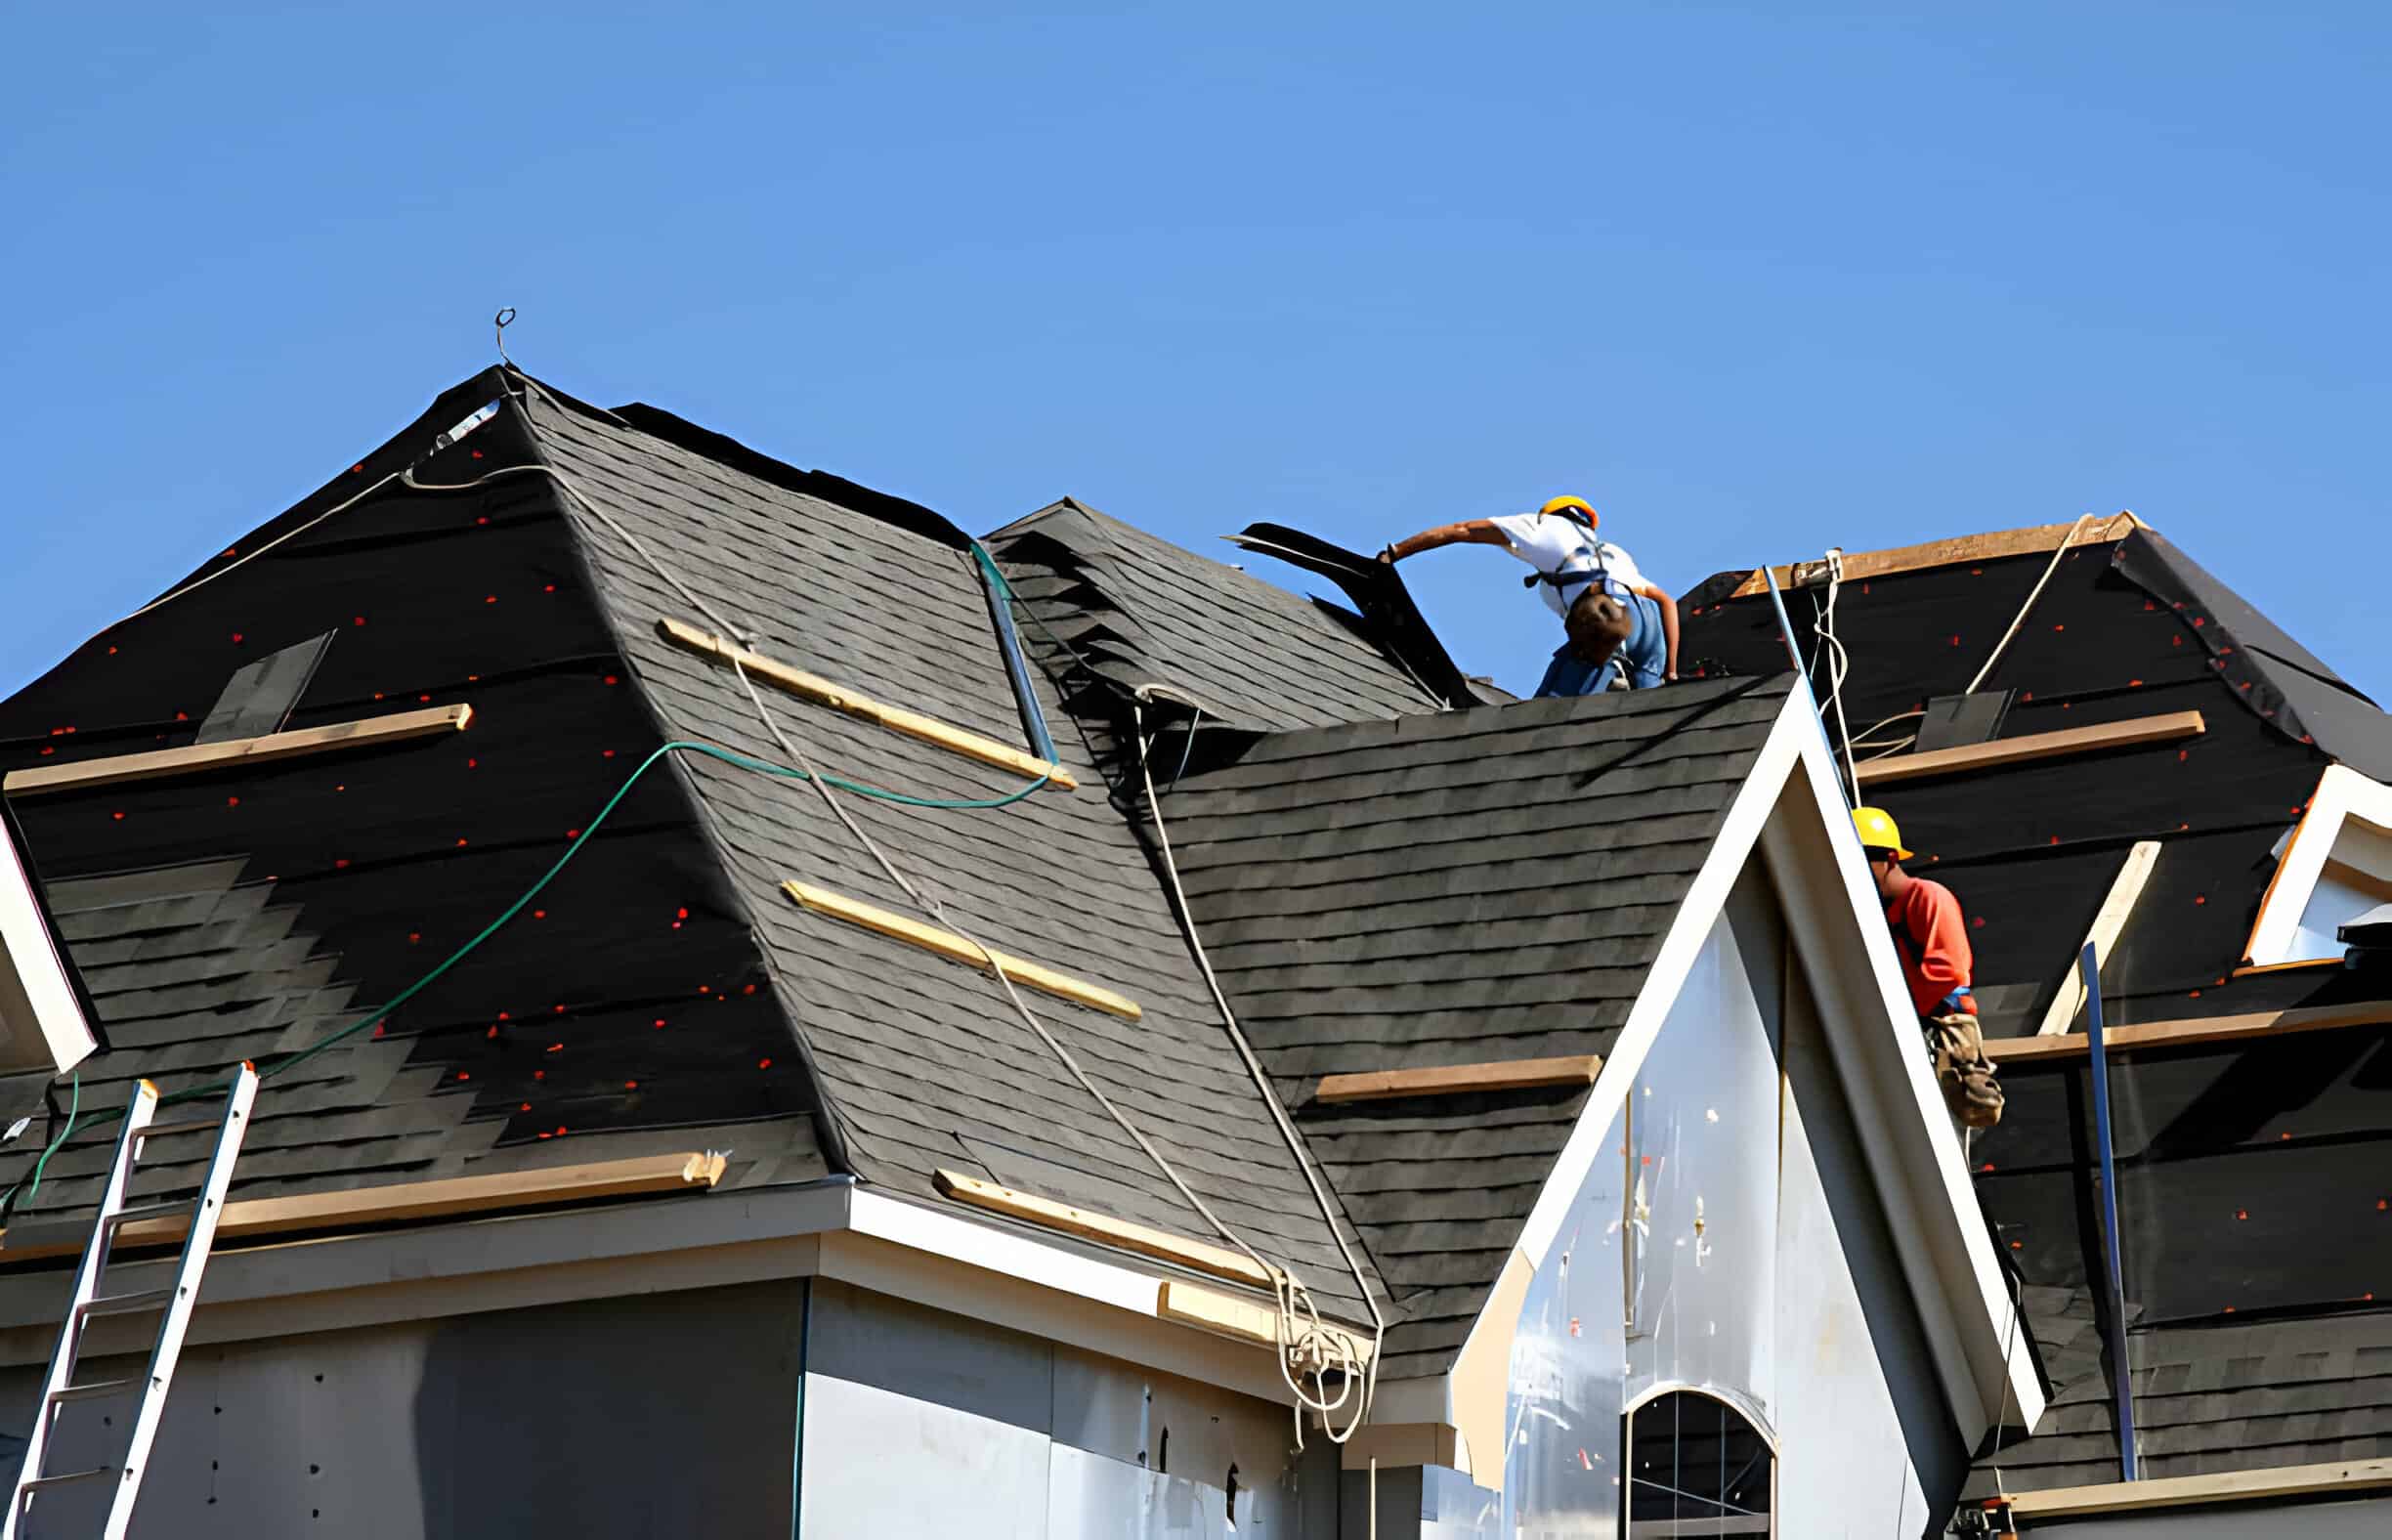 Construction workers installing shingles on the roof of a home.